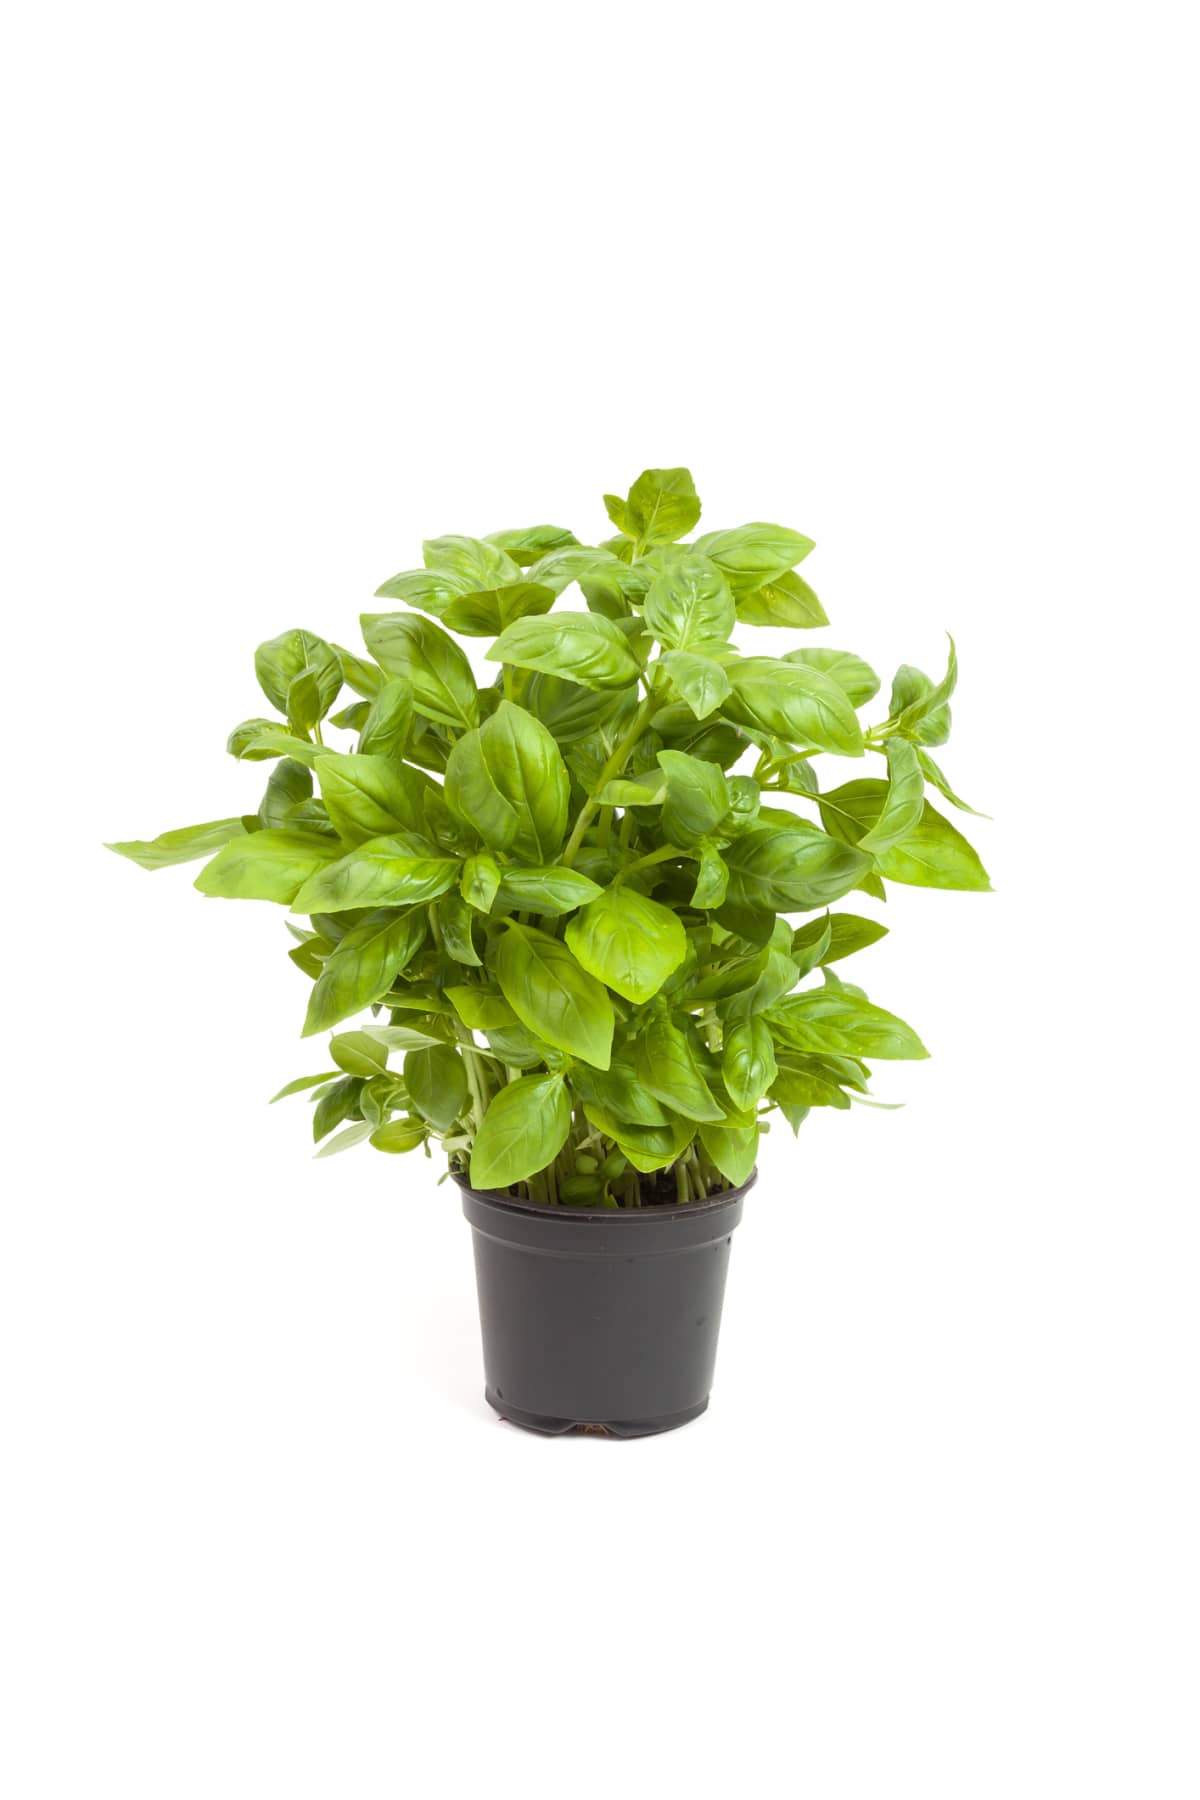 Basil in a pot, isolated on white background